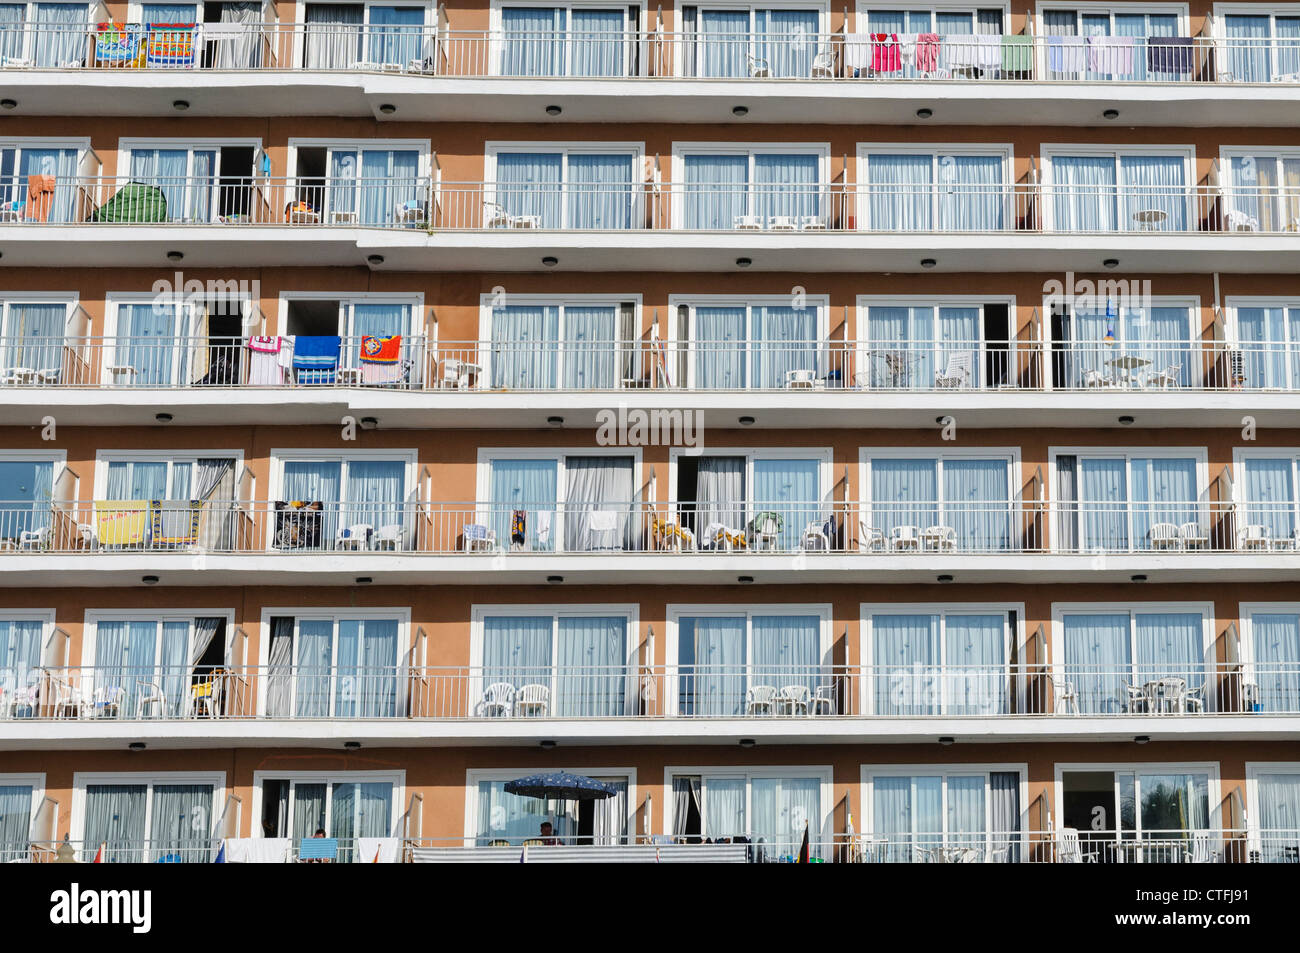 Typical balconies of a Spanish hotel during the tourist season Stock Photo